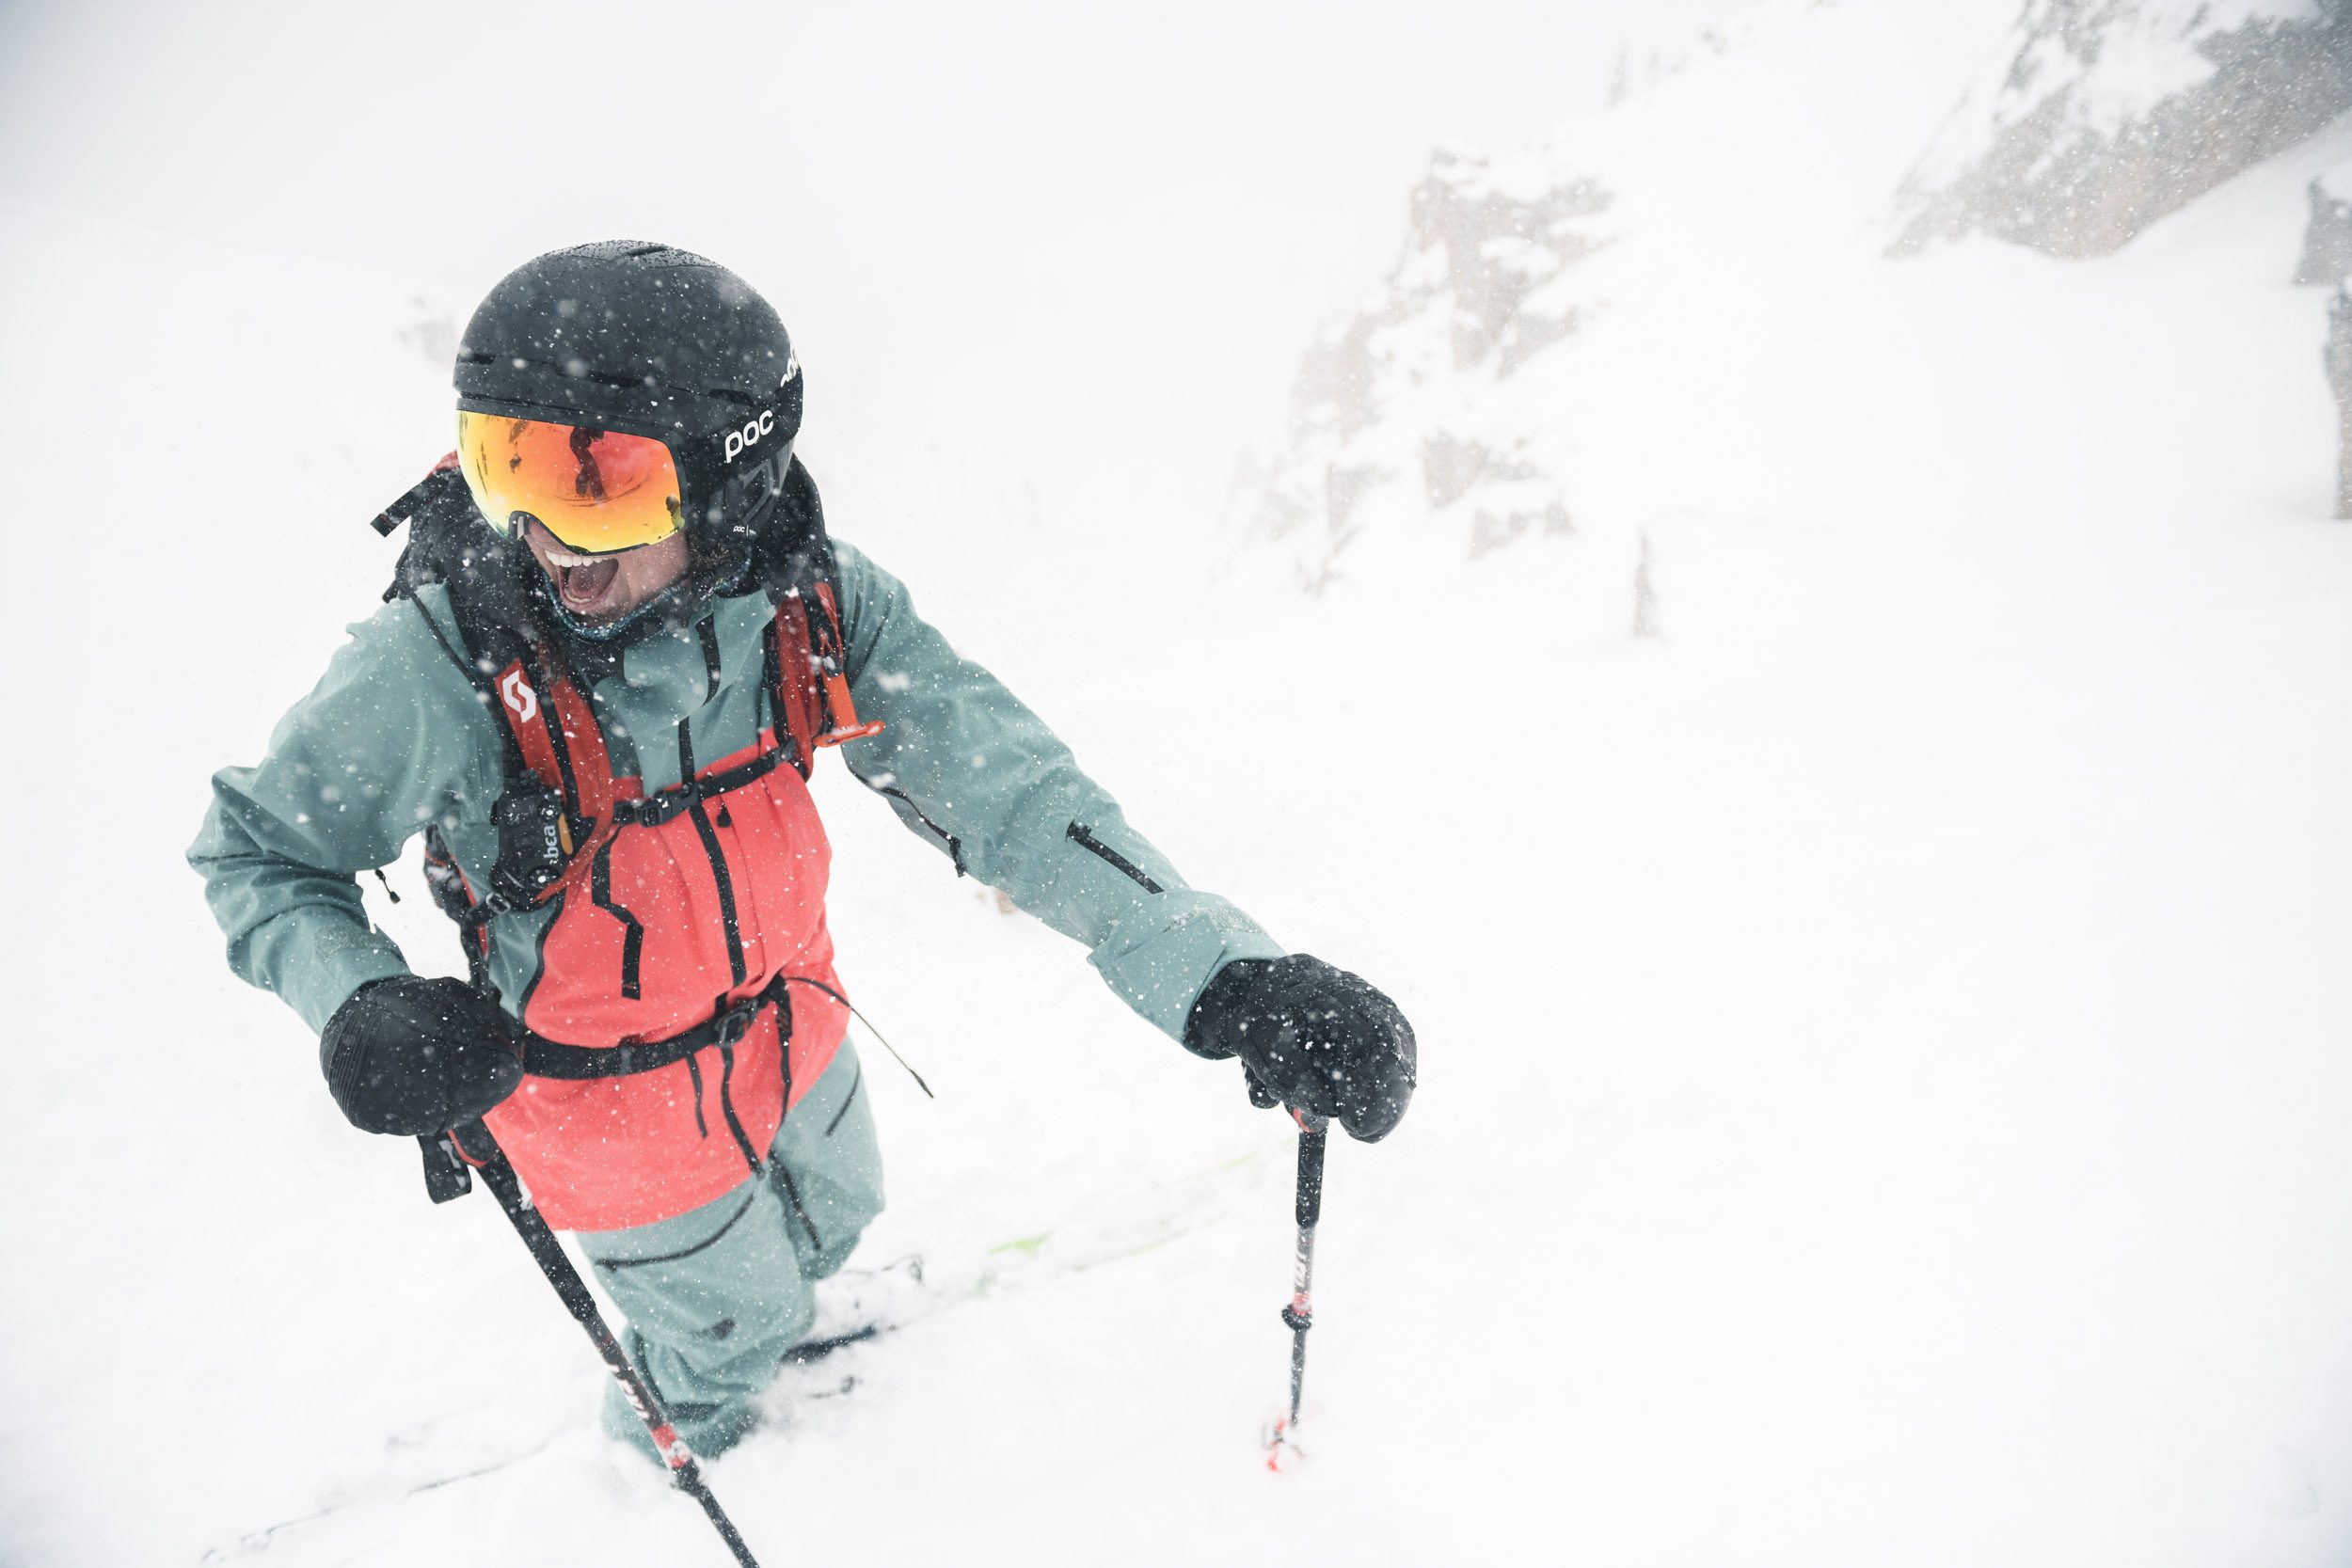 Early Access: Save Up to 50% During Backcountry's Winter Sale